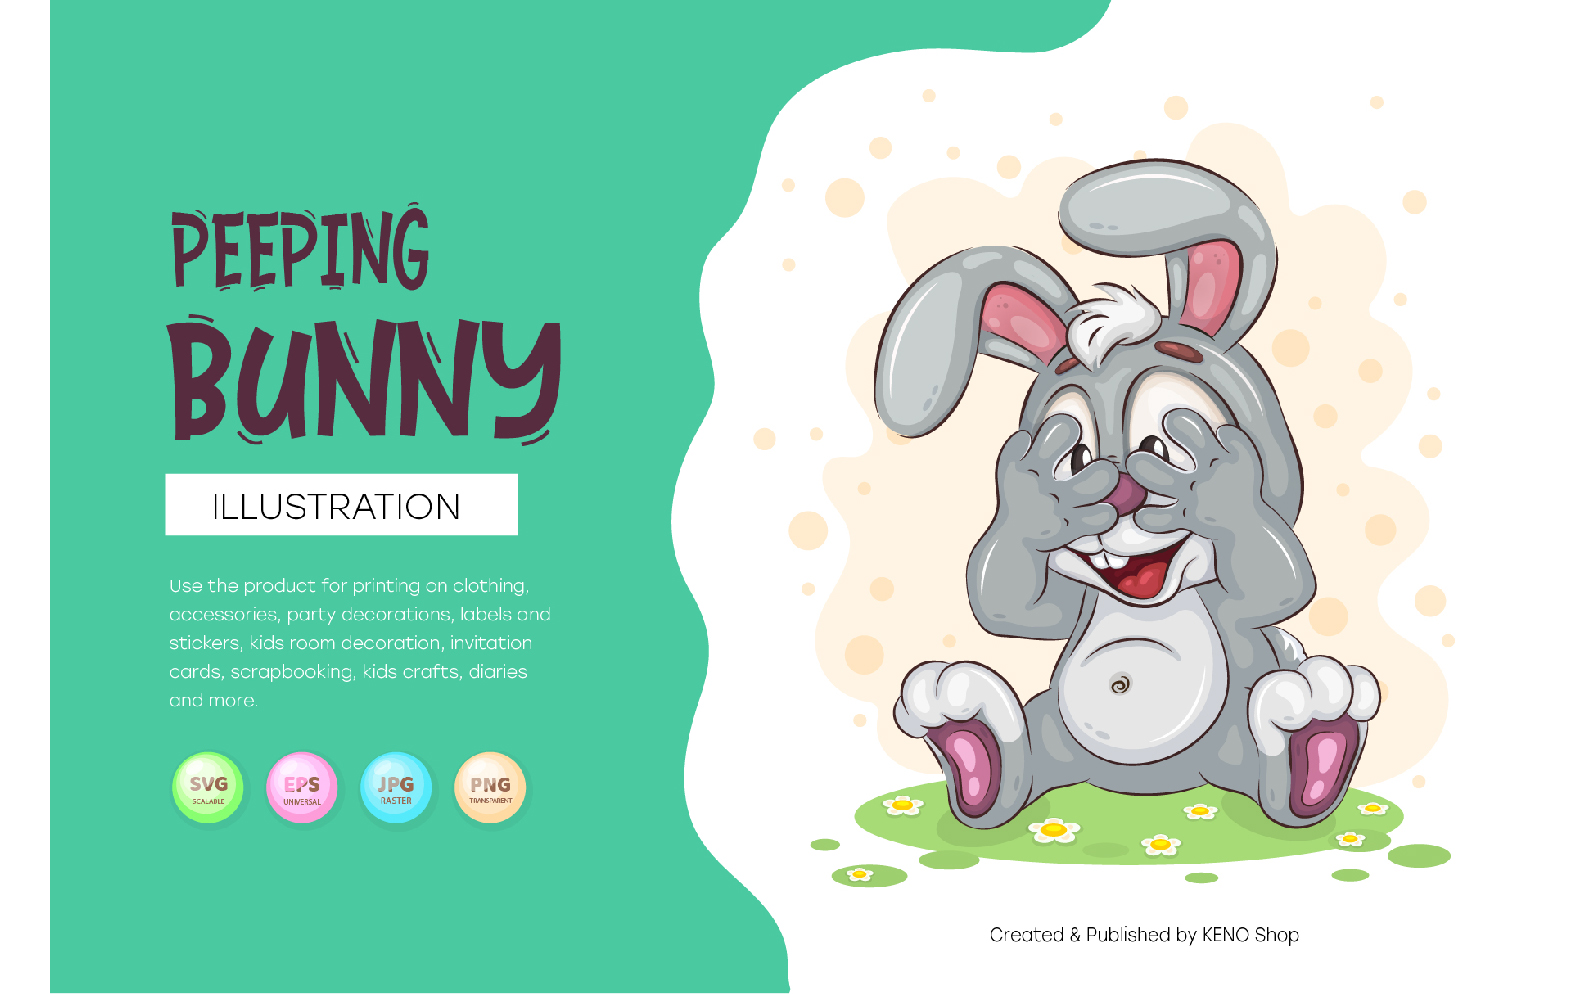 Peeping Easter Bunny. T-Shirt, PNG, SVG.